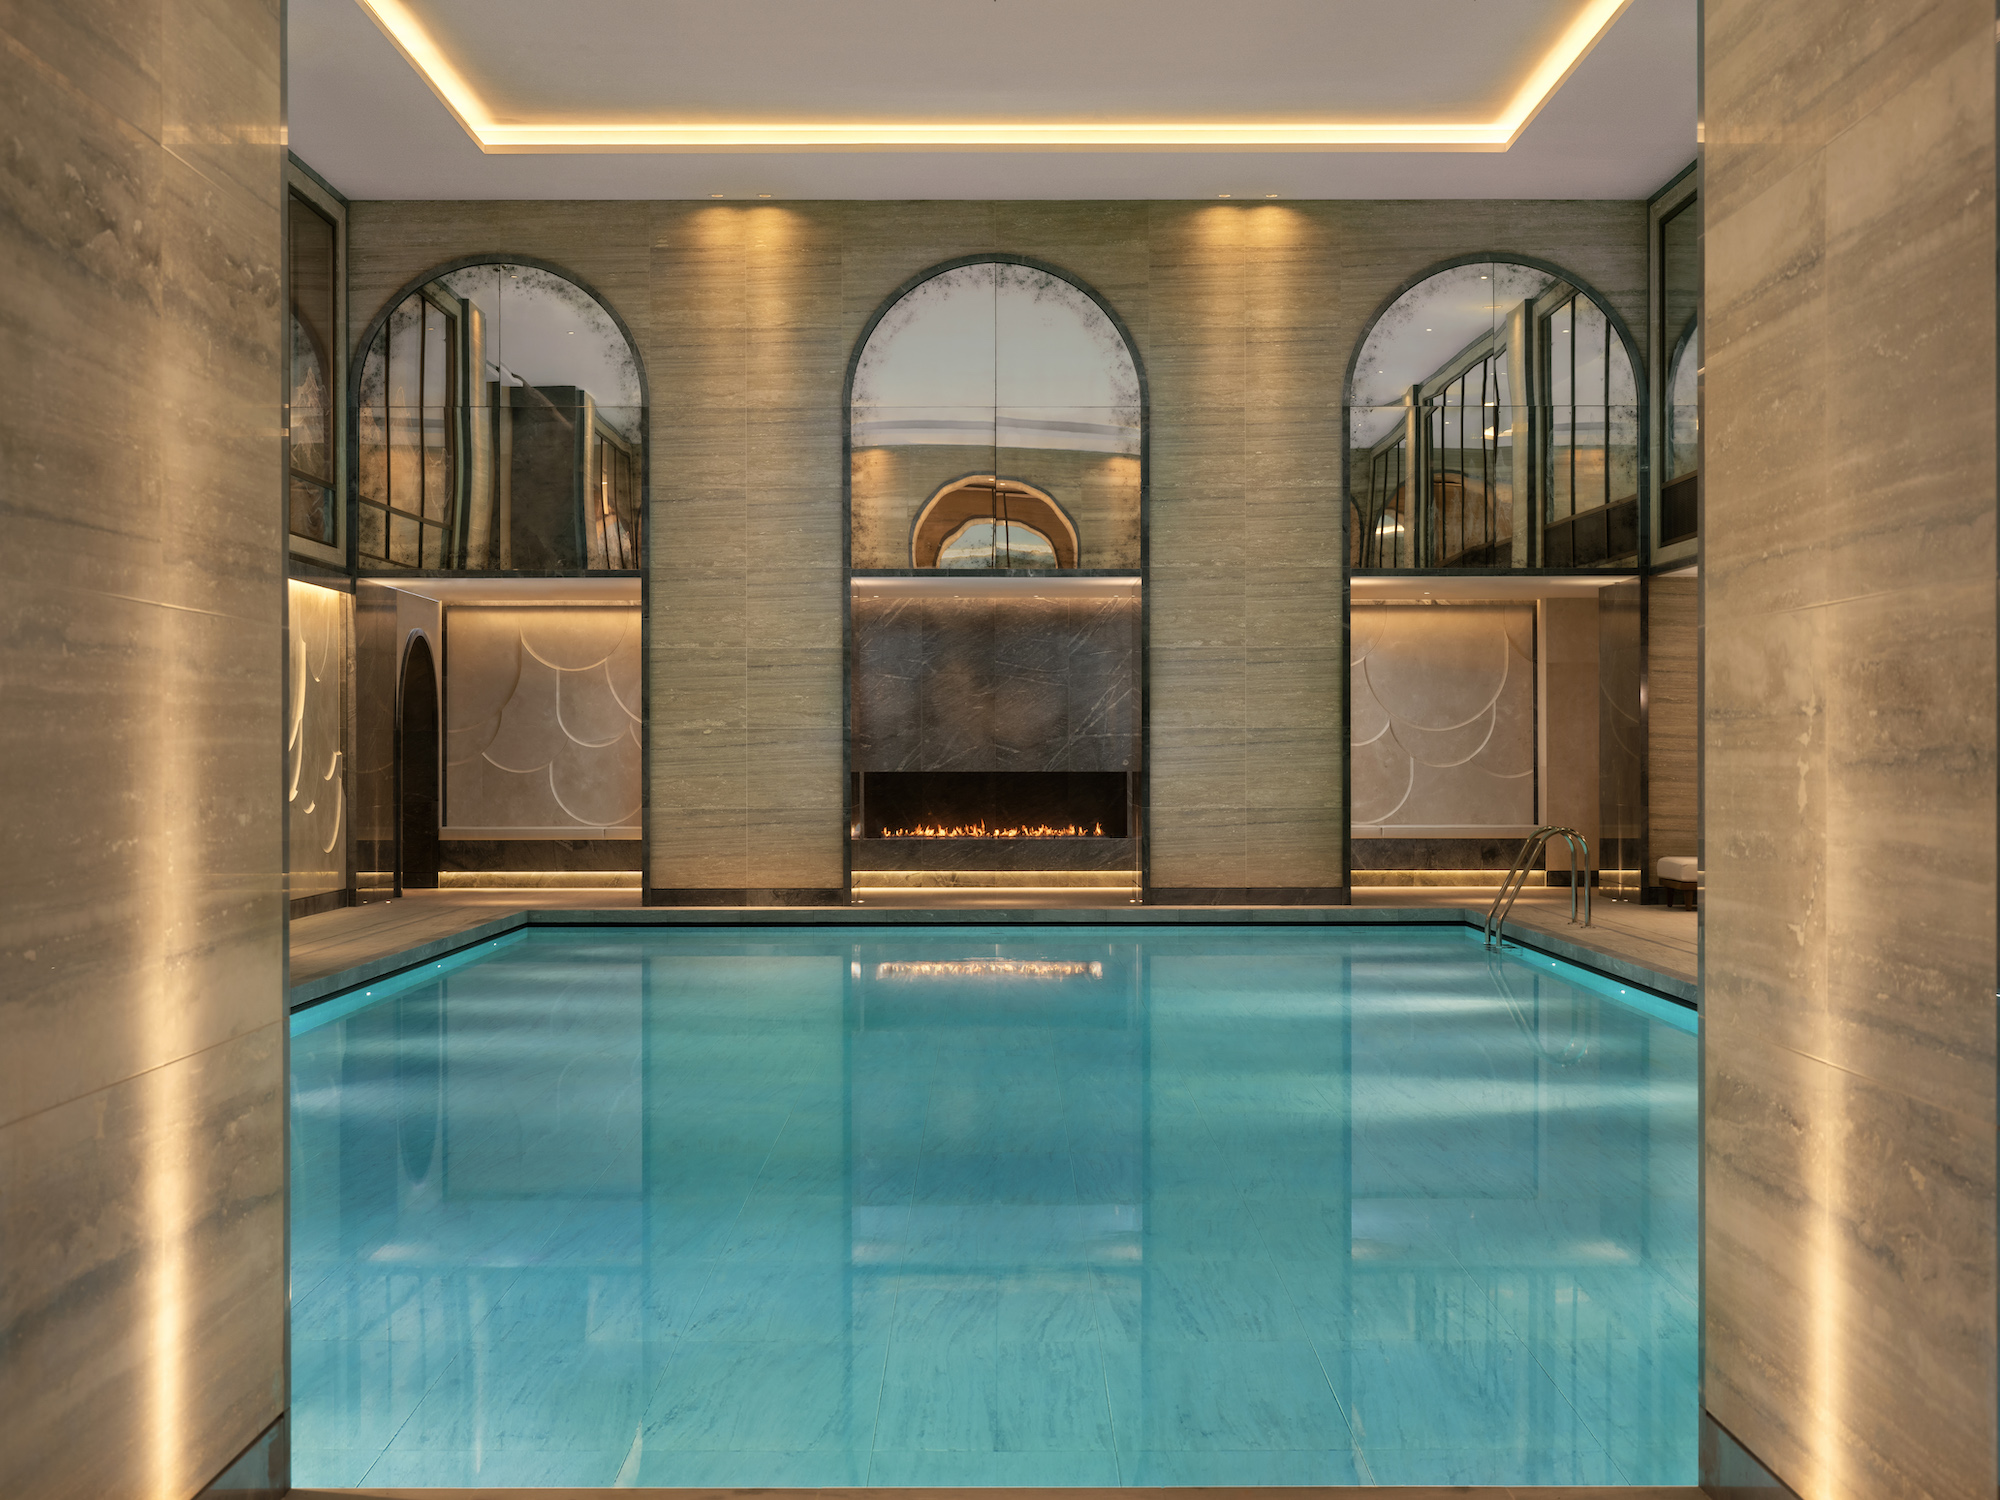 Goddard Littlefair created the pool, spa and wellness area at the landmark Raffles London hotel in the Old War Office (OWO) - Effect Magazine